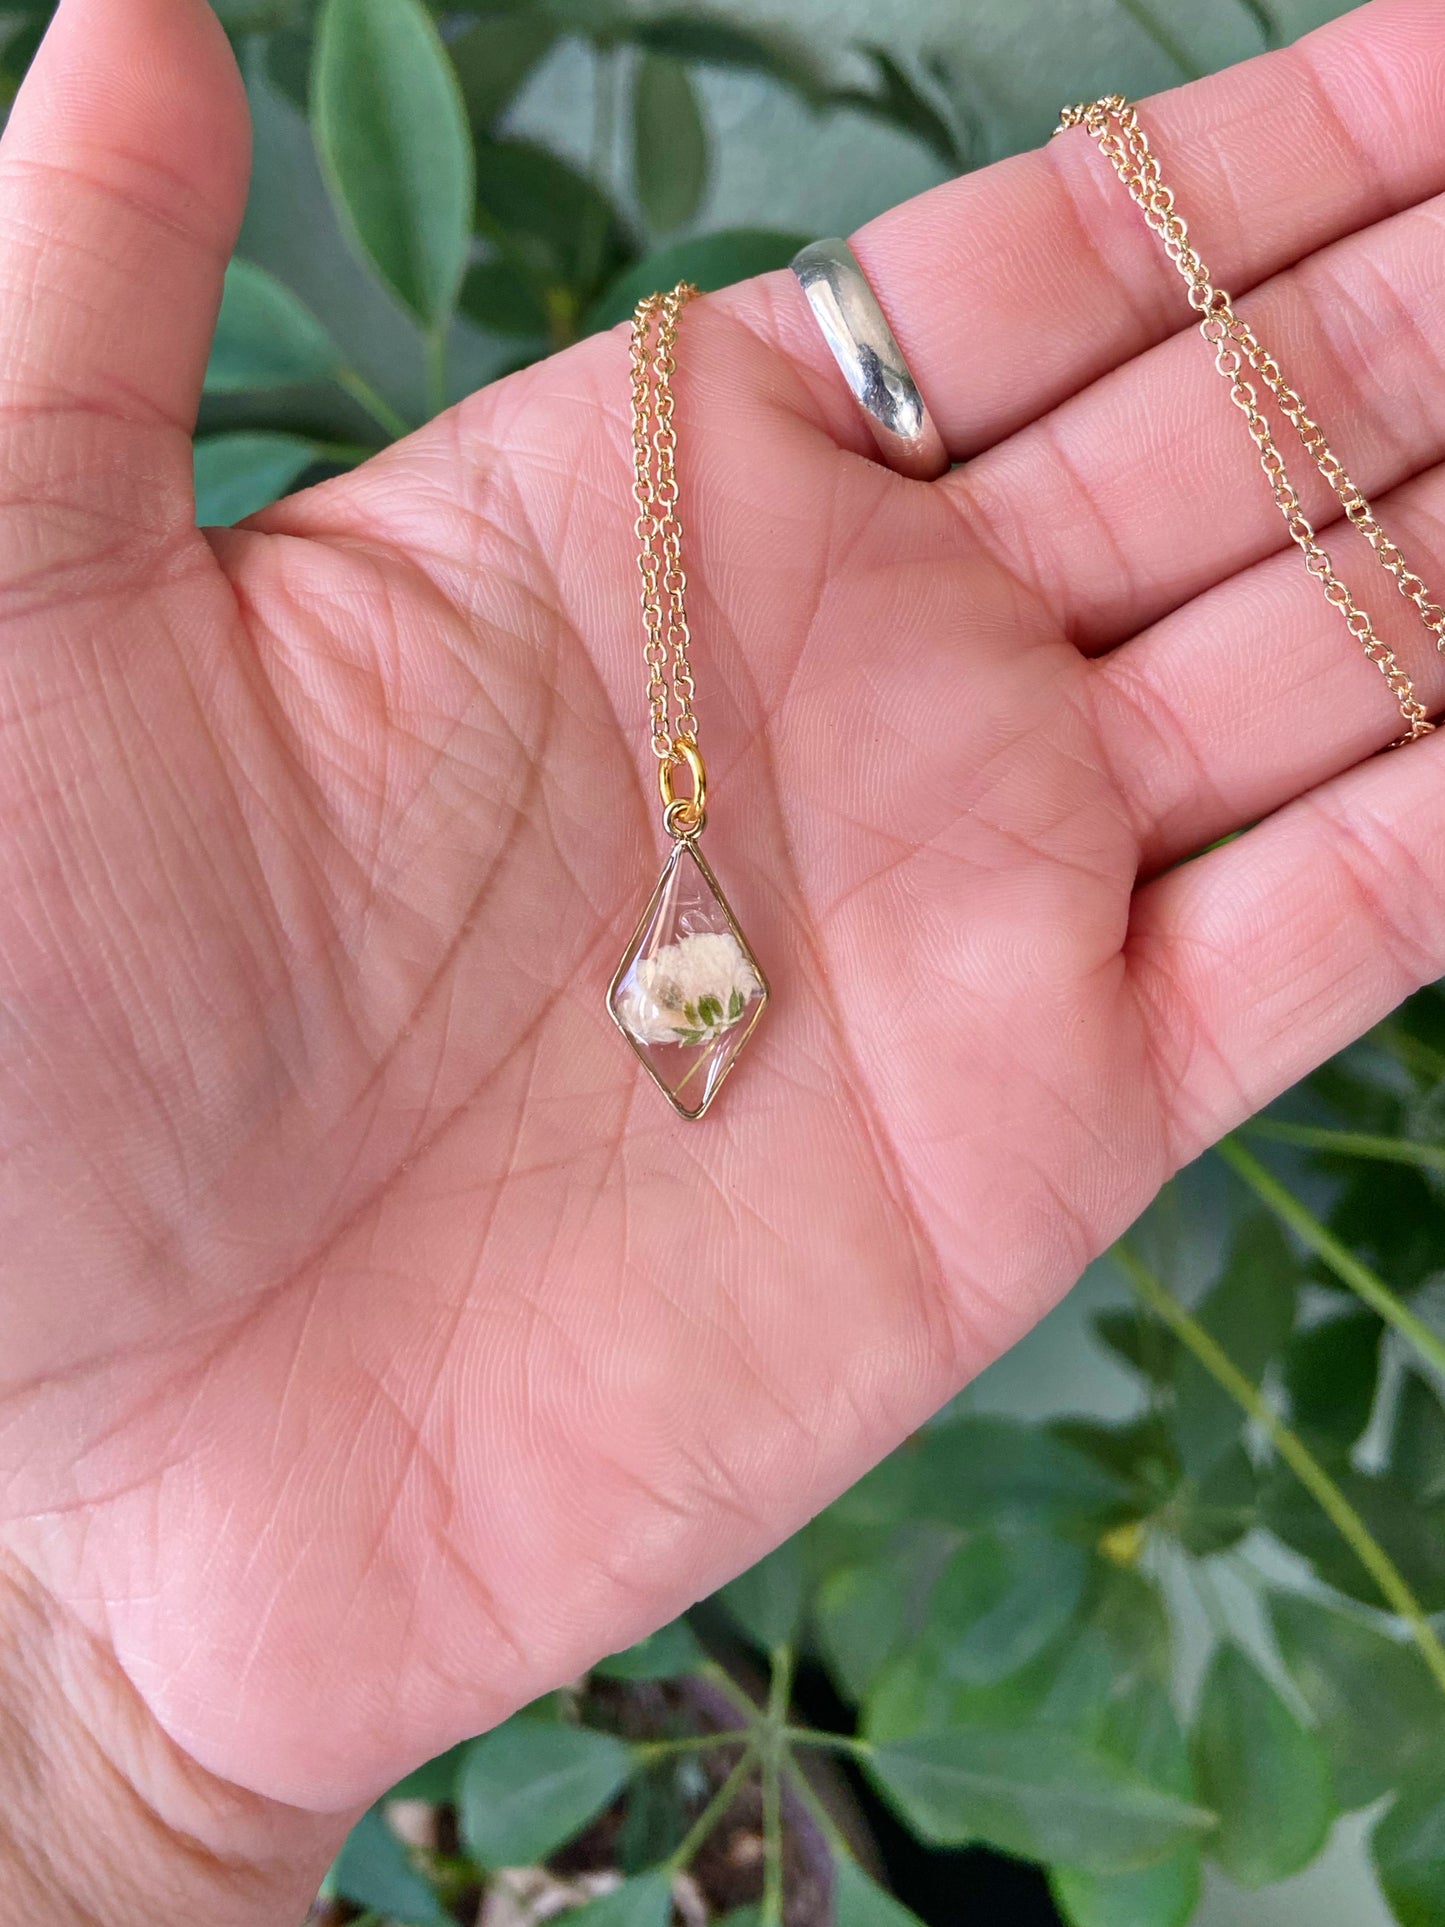 Baby's Breath - Dainty gold pendant with single white pressed flower inside, 16" gold plated chain included